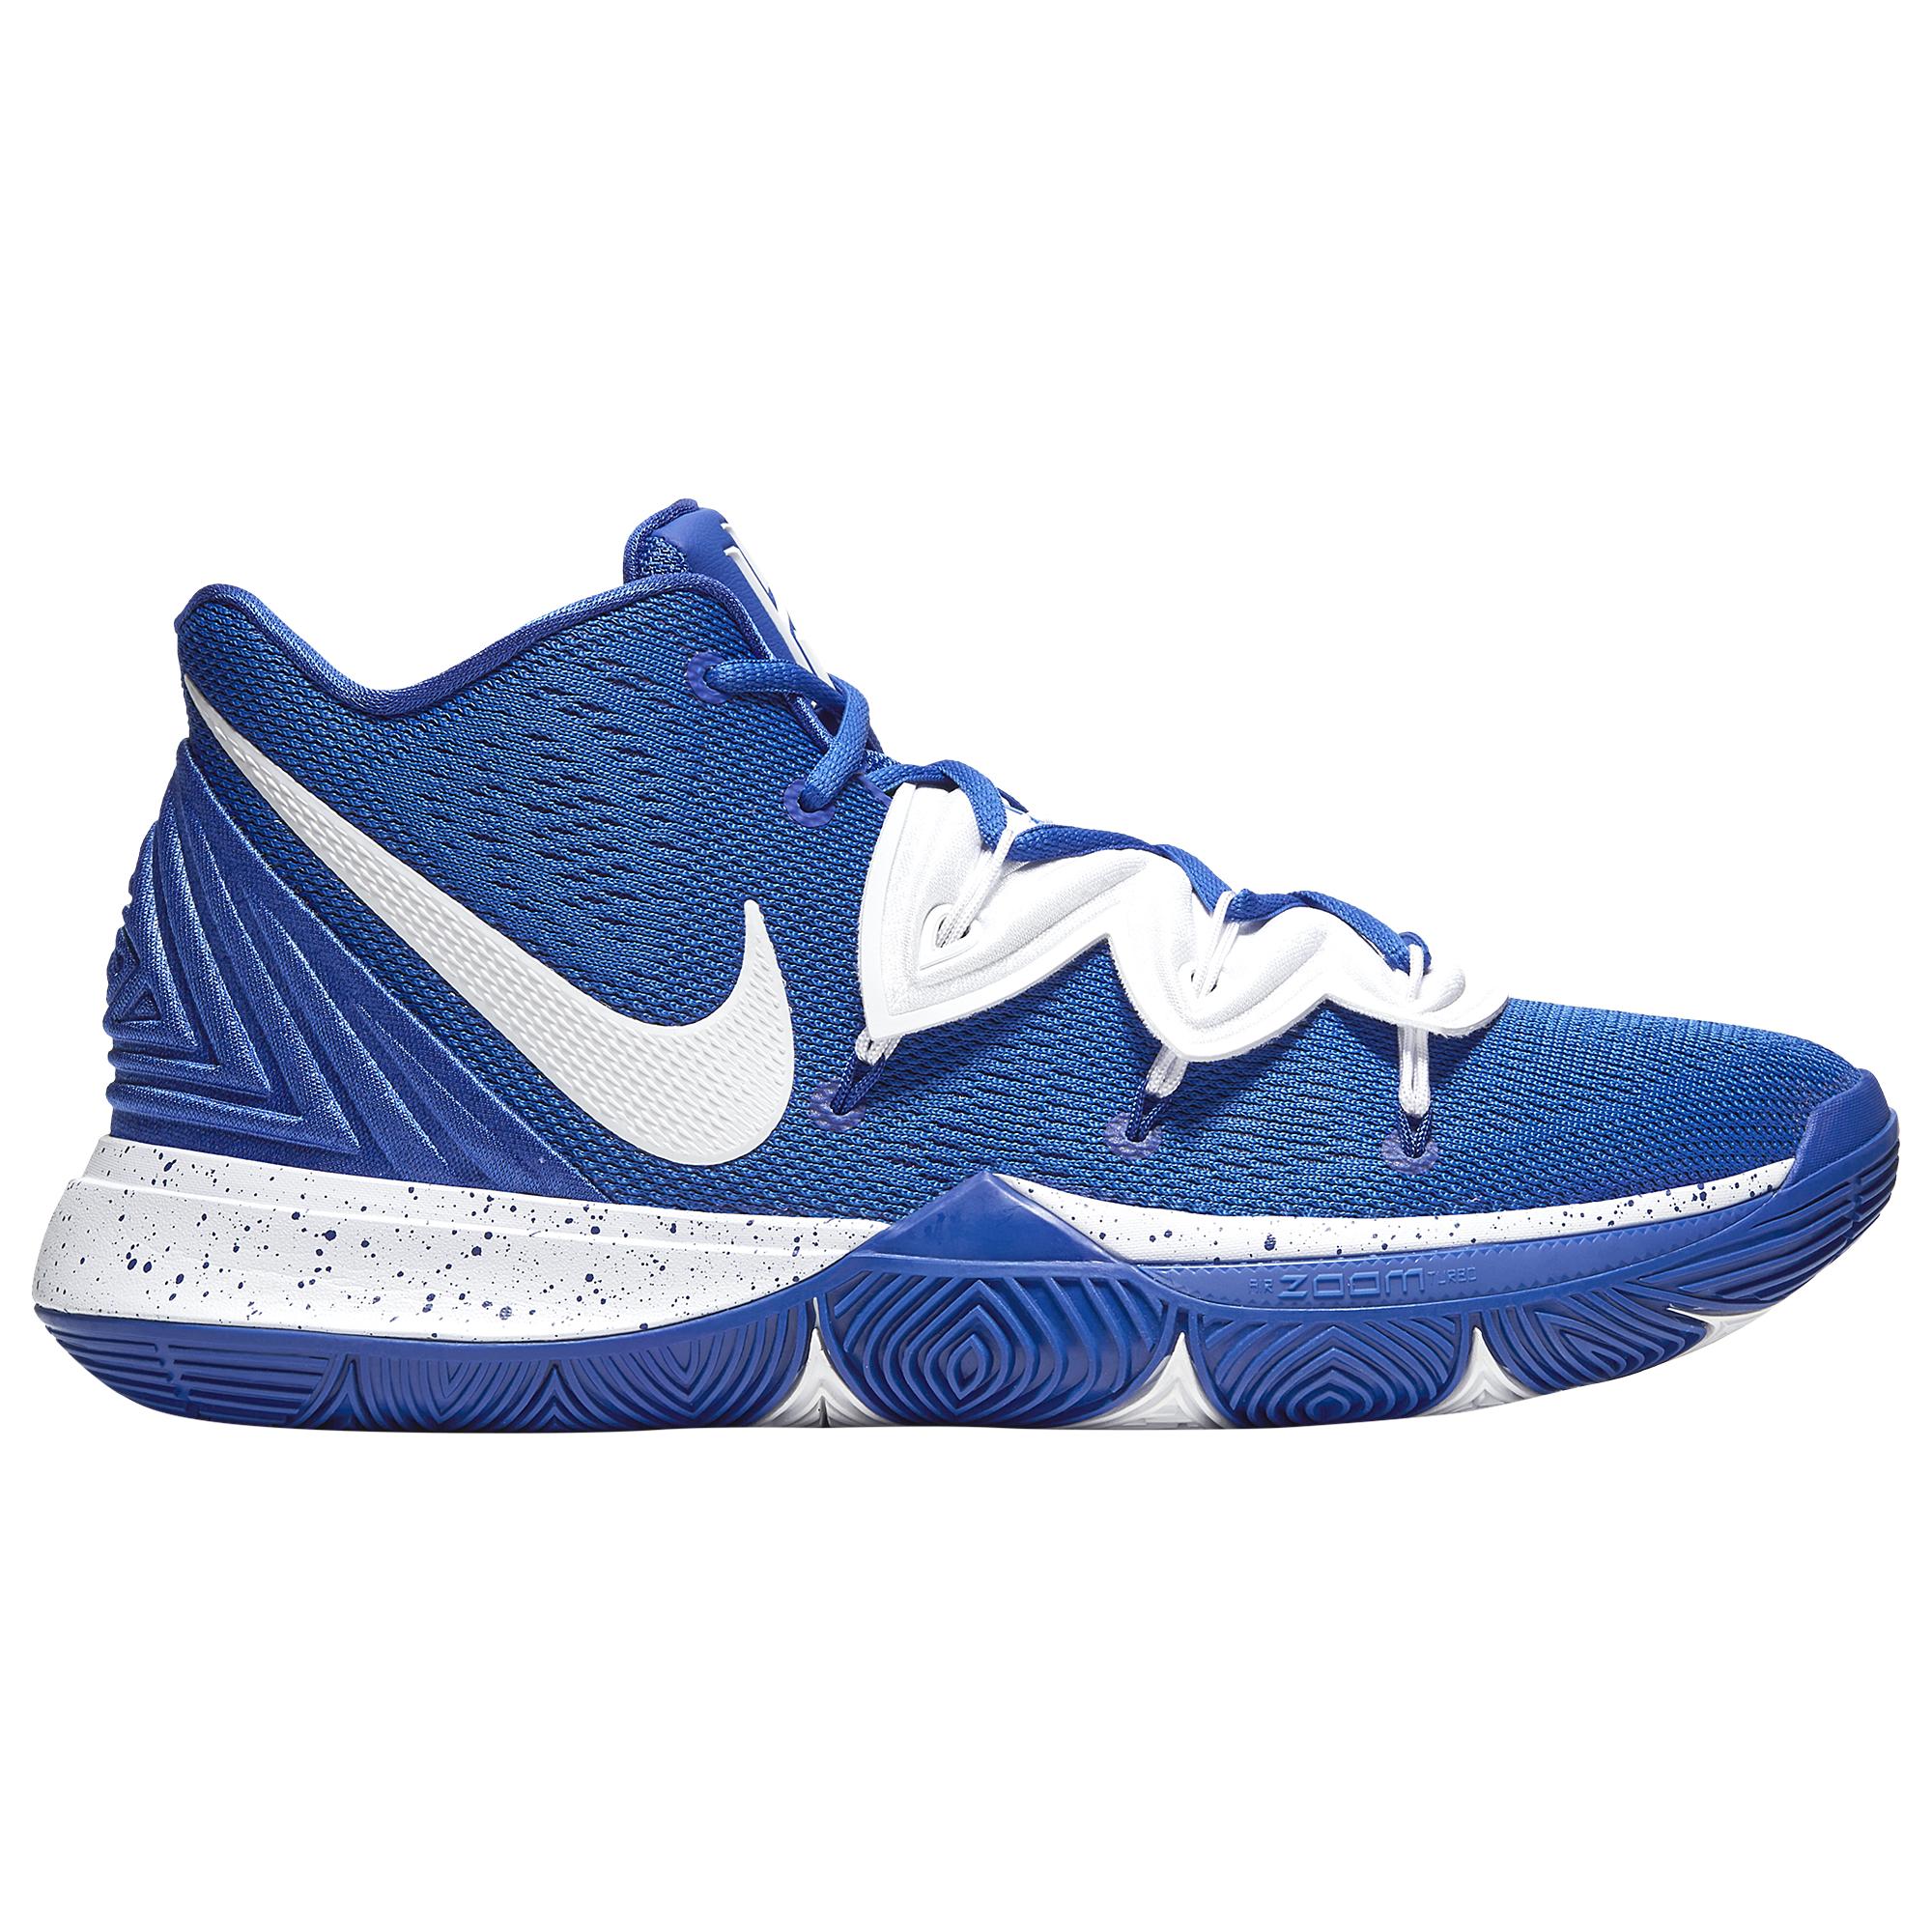 kyrie 5 blue and white